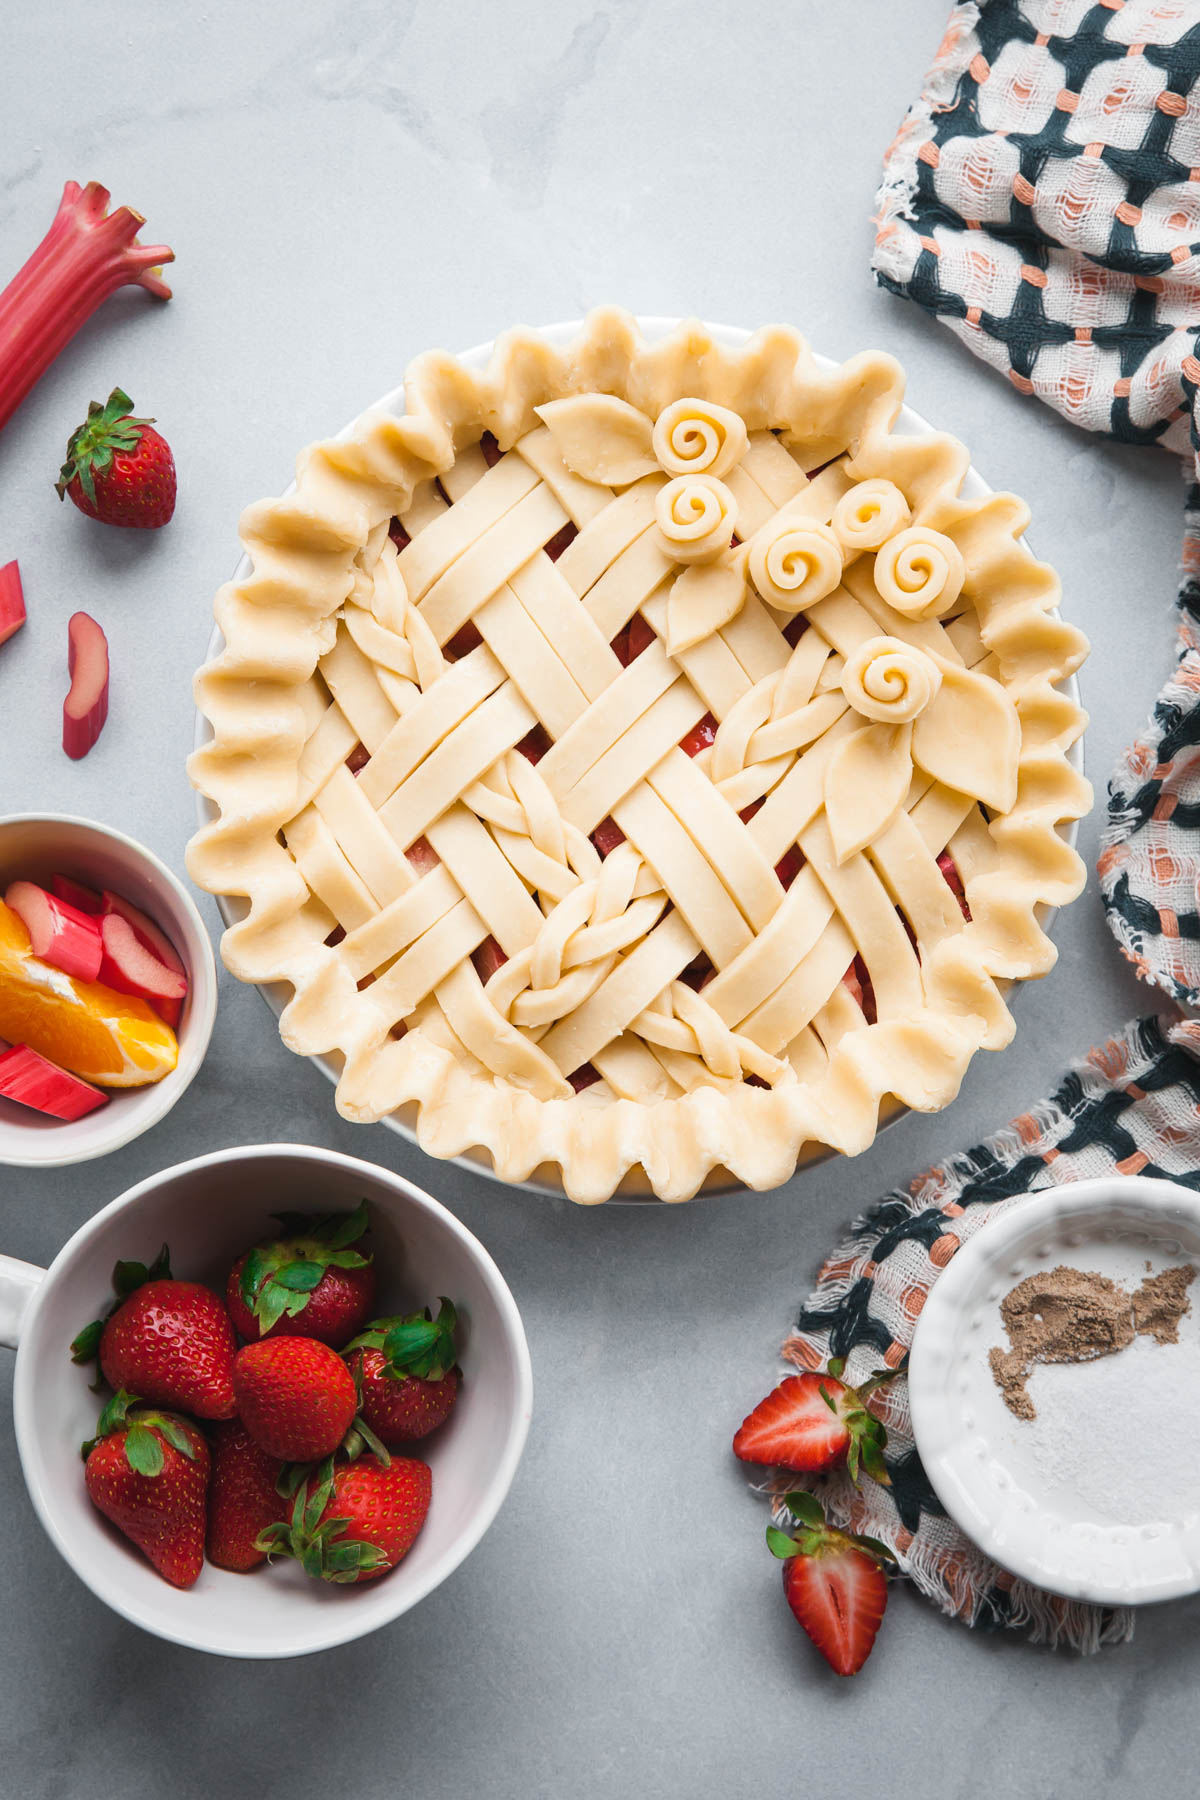 An unbaked strawberry rhubarb pie with a braided lattice and hints of orange zest.